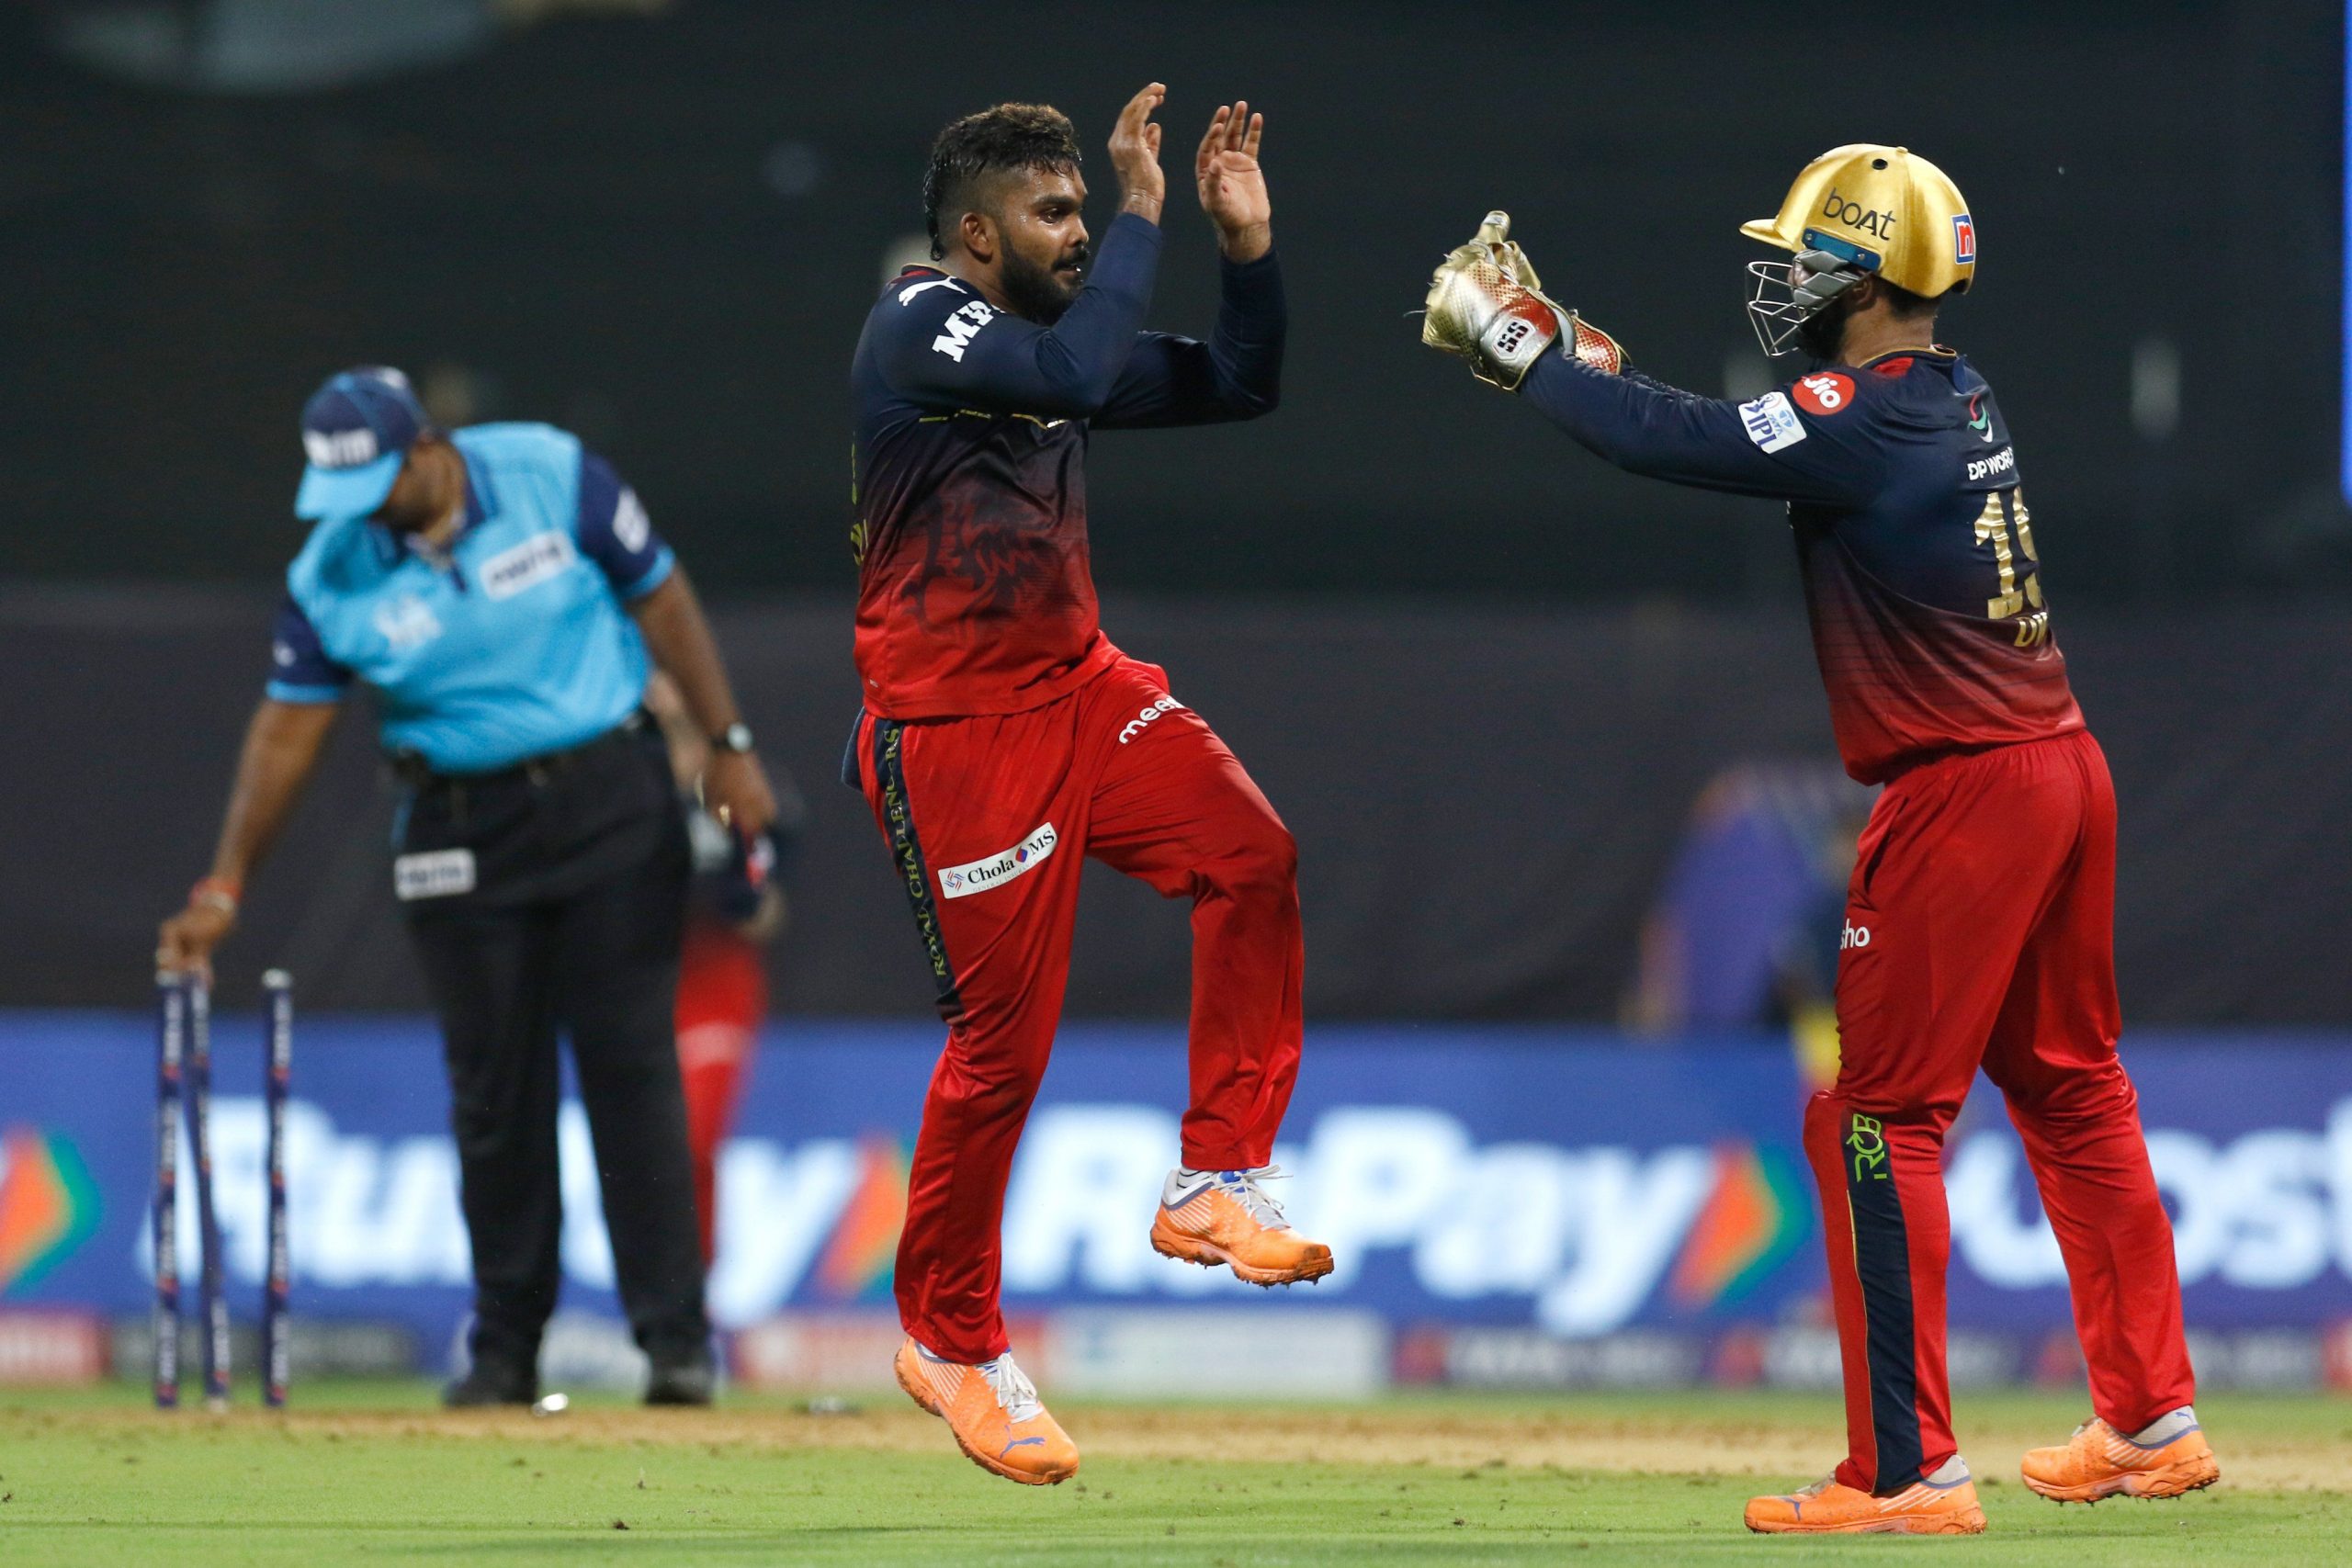 IPL 2022: RCB beat DC by 16 runs, go up to 3rd position on points table